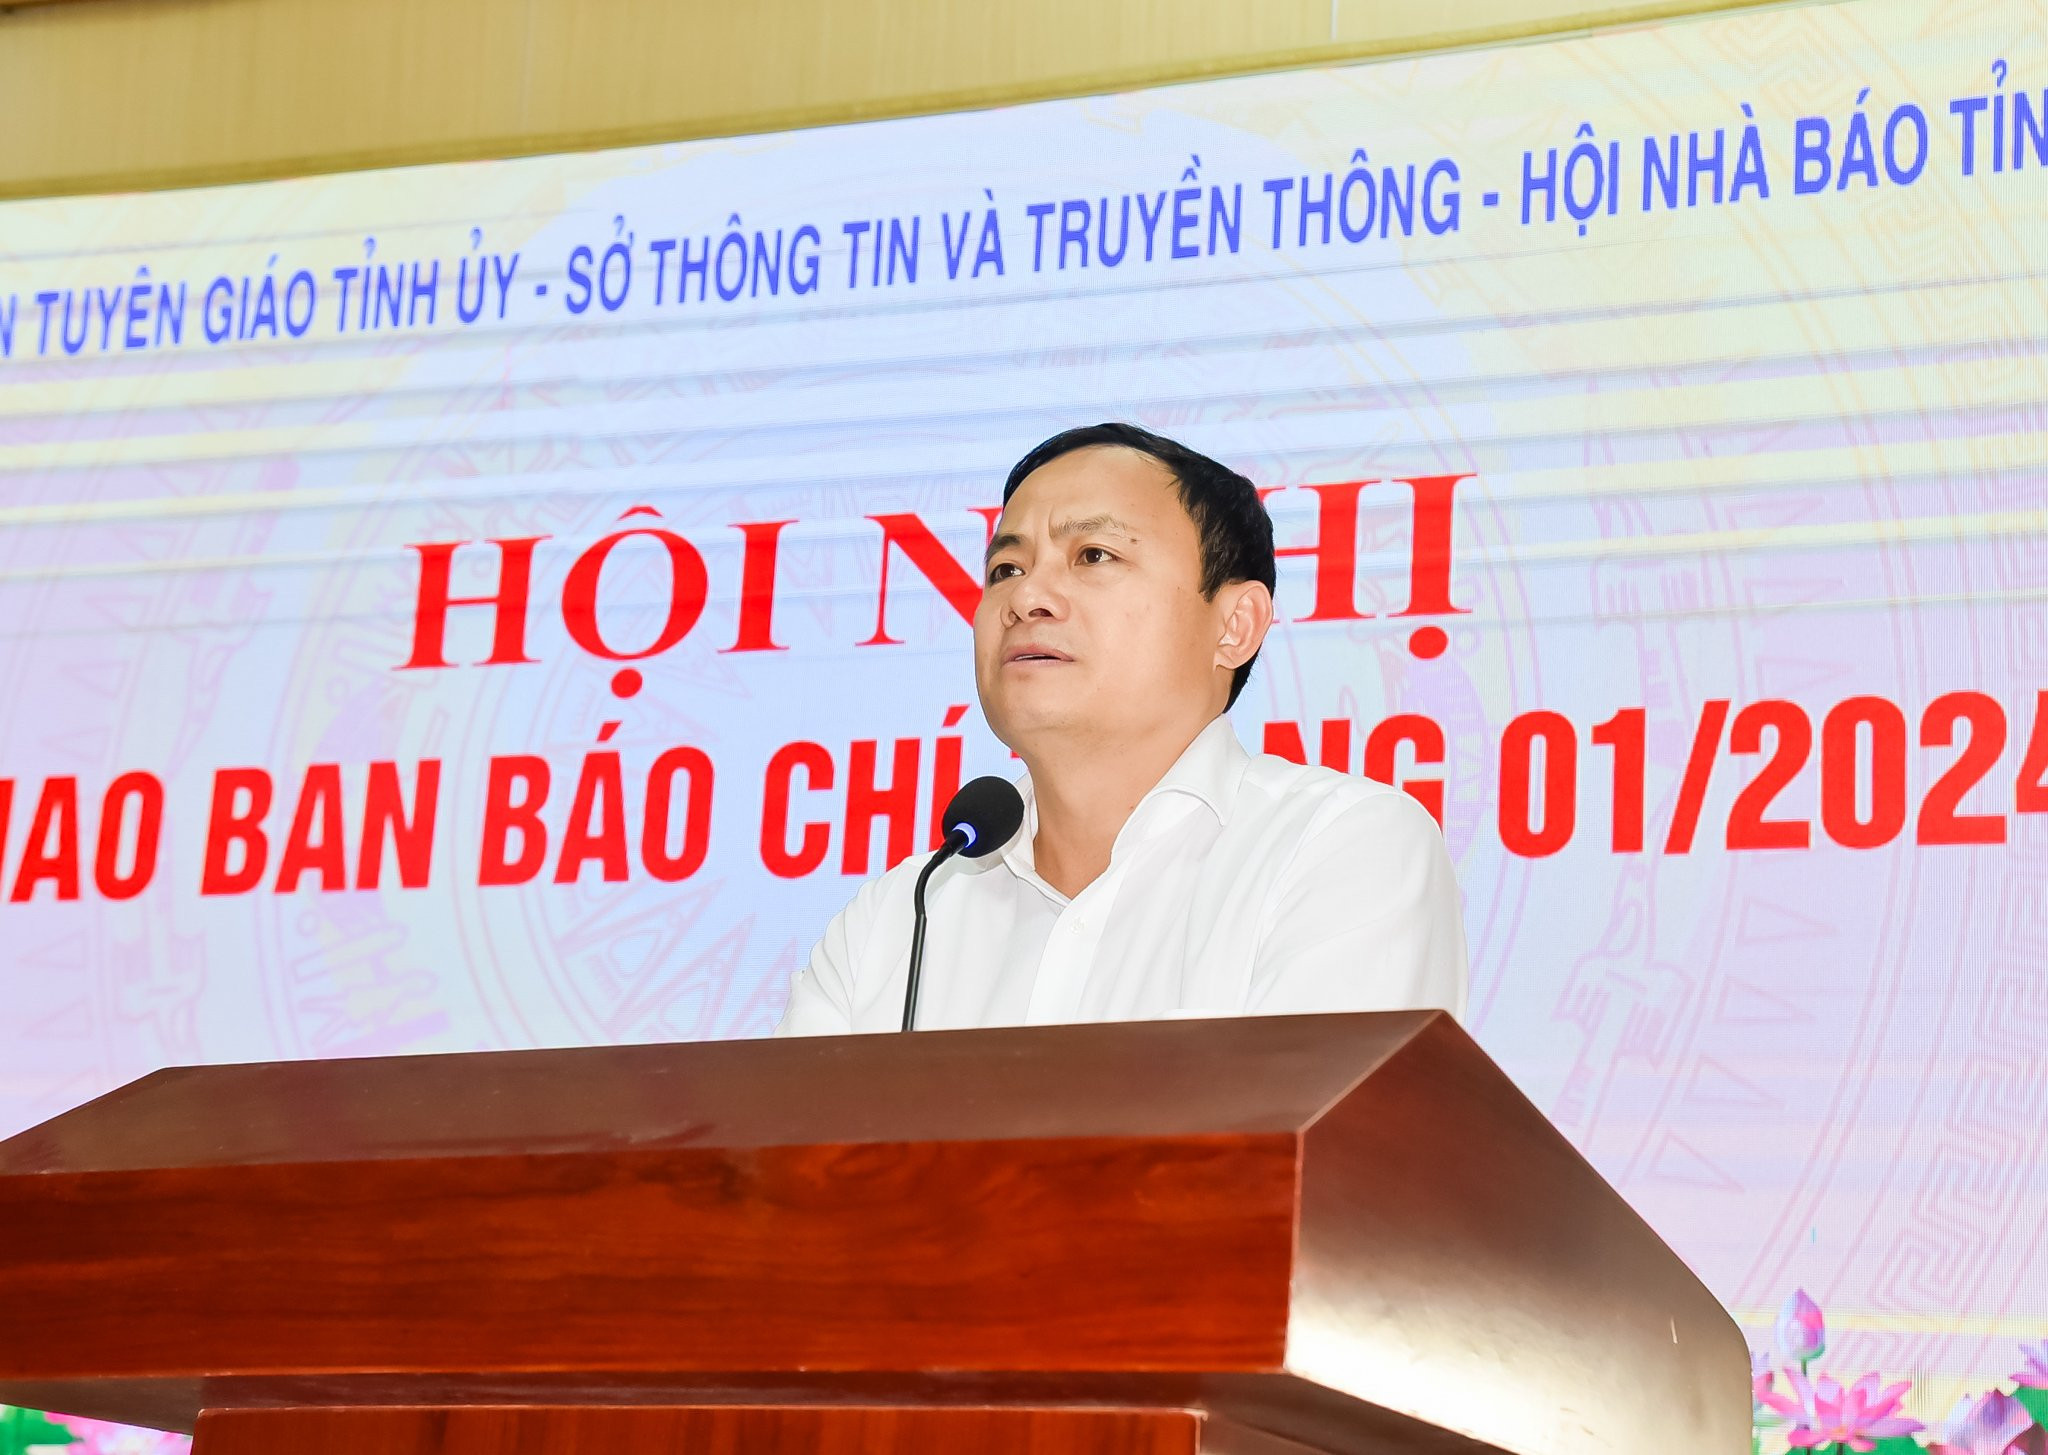 bna-a-canh-anh-thanh-le-5457.jpg